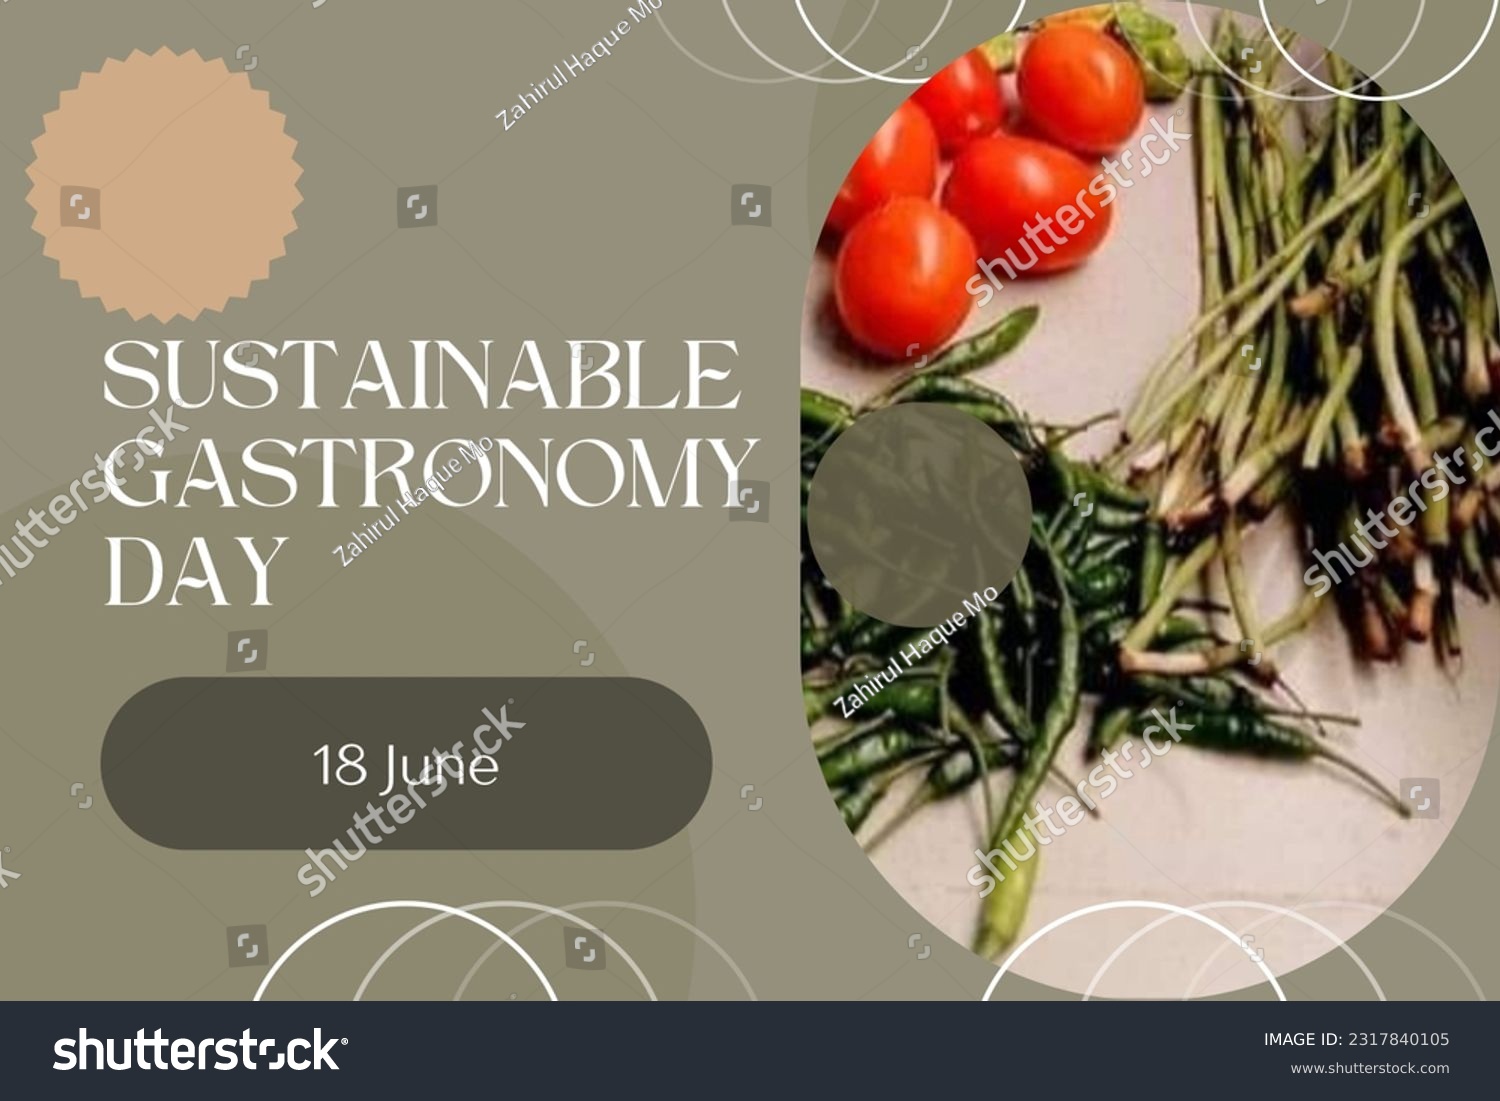 Sustainable Gastronomy Day 18 June #2317840105